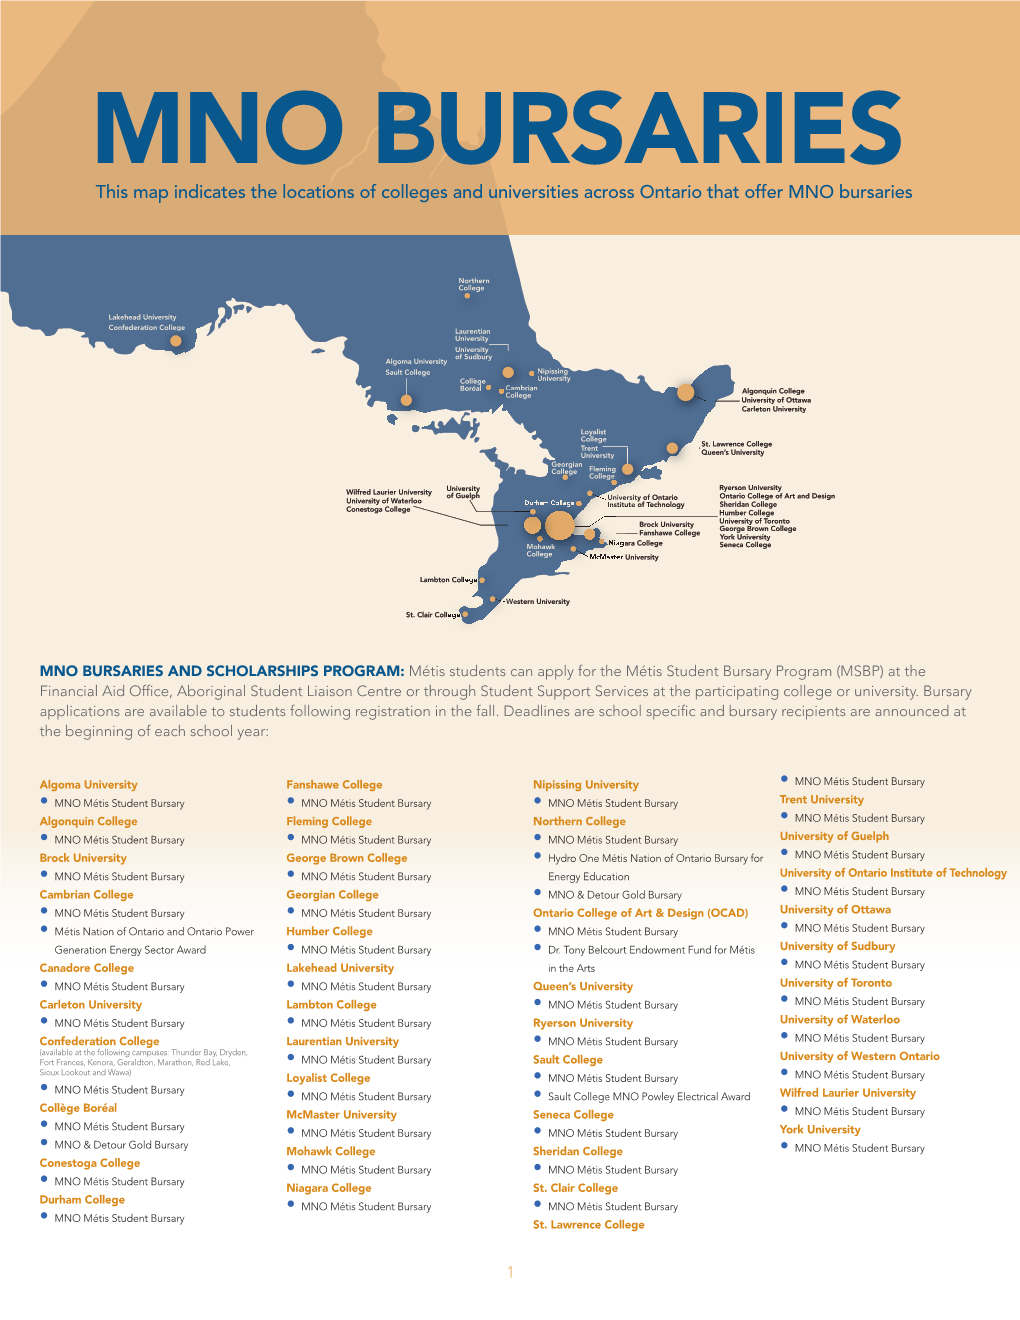 MNO BURSARIES This Map Indicates the Locations of Colleges and Universities Across Ontario That Offer MNO Bursaries